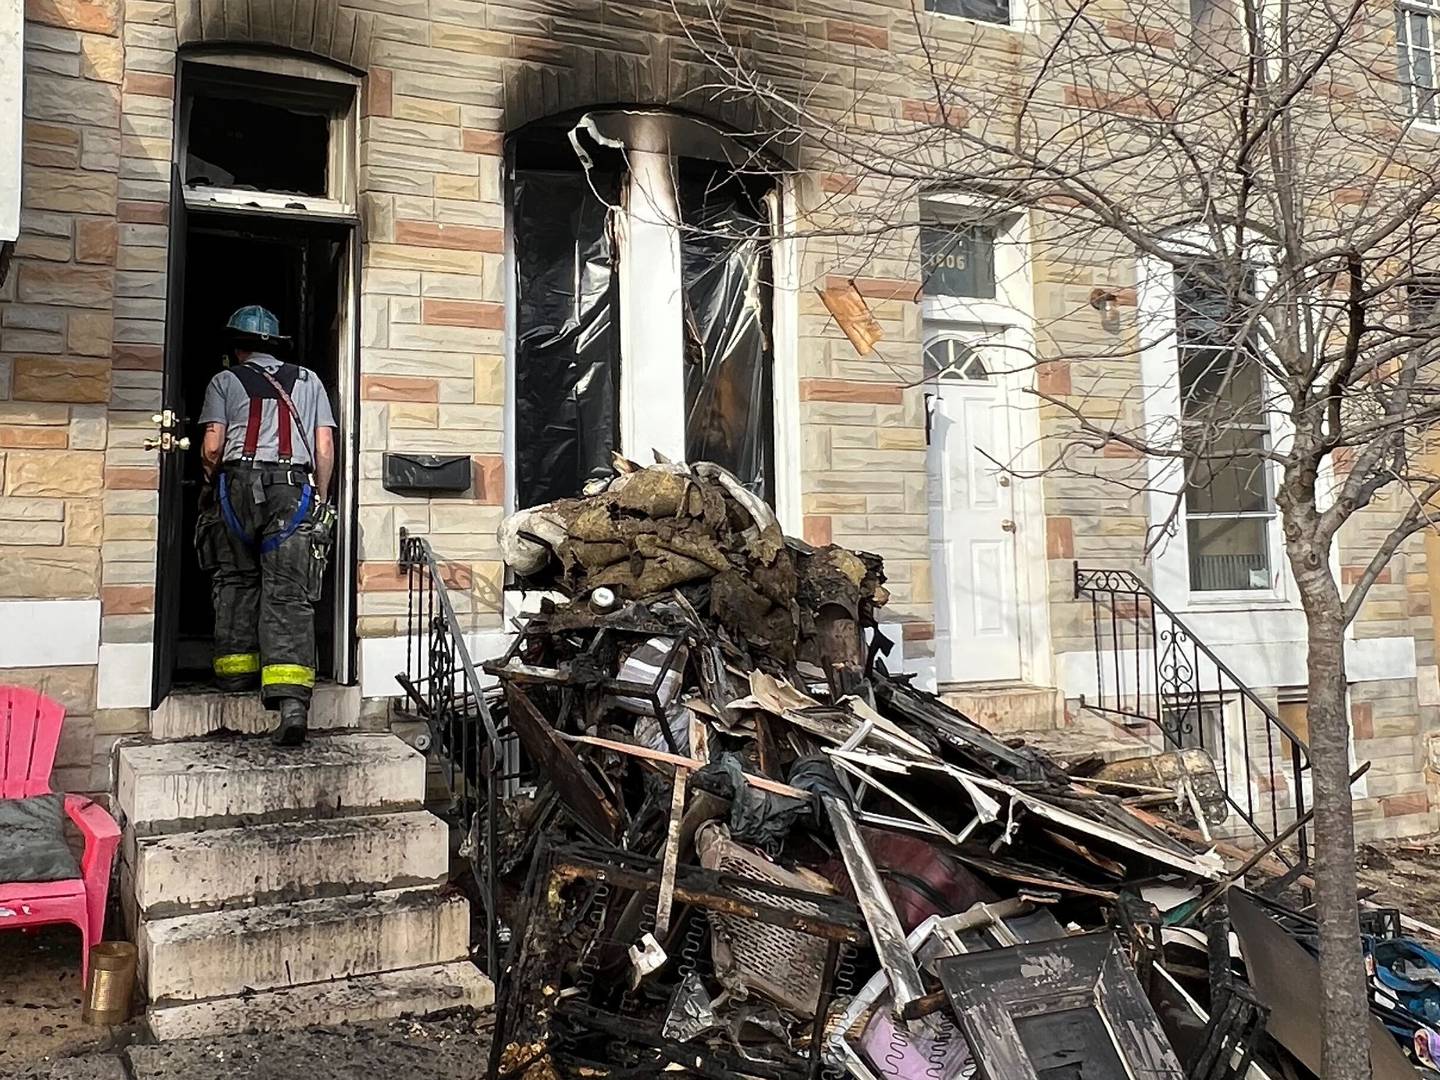 A 5-year-old boy died in a house fire in East Baltimore.